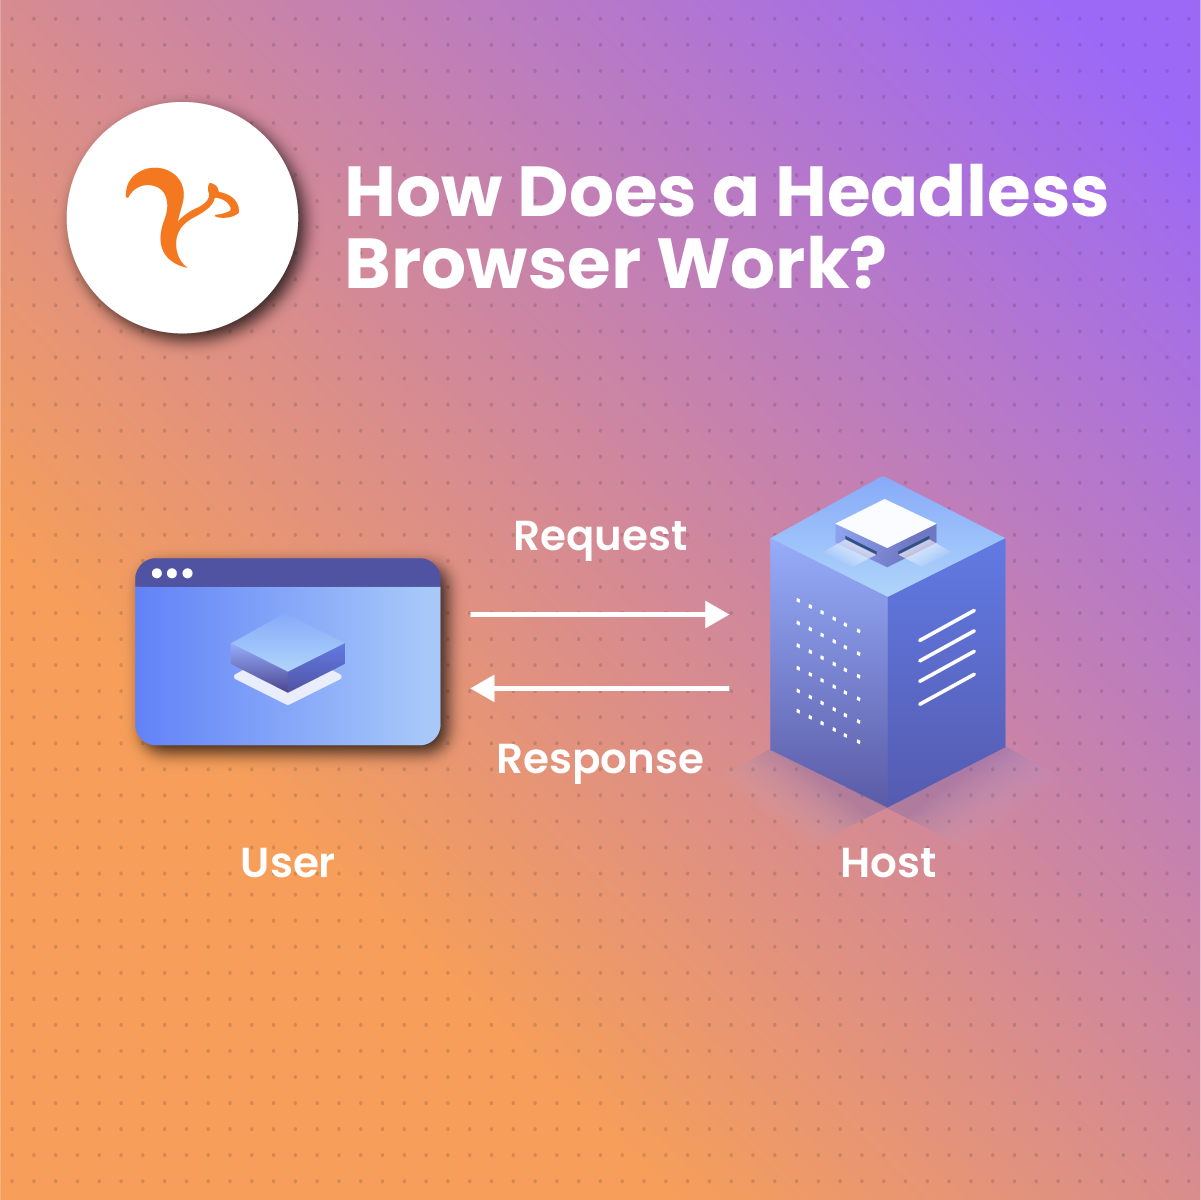 How Does a Headless Browser Work?